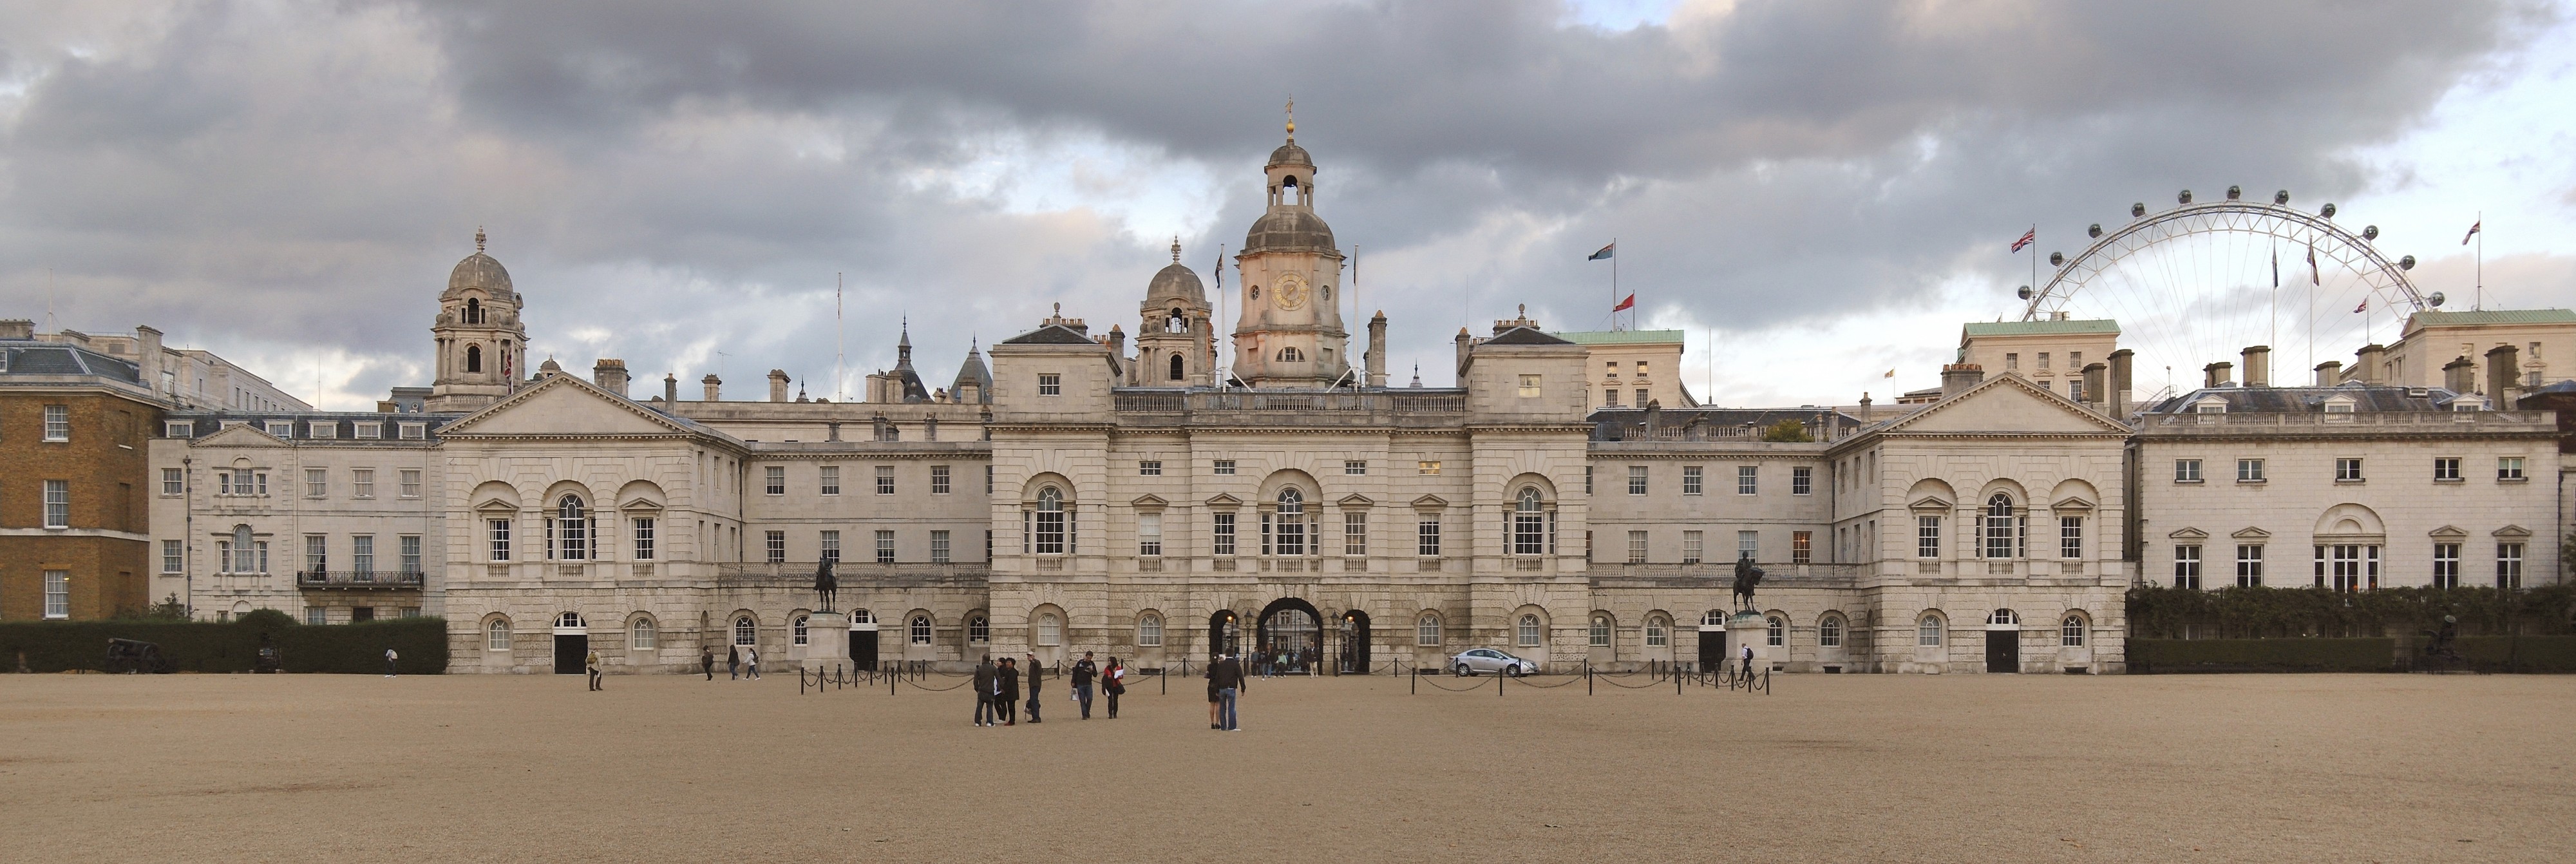 Horse Guards 2011